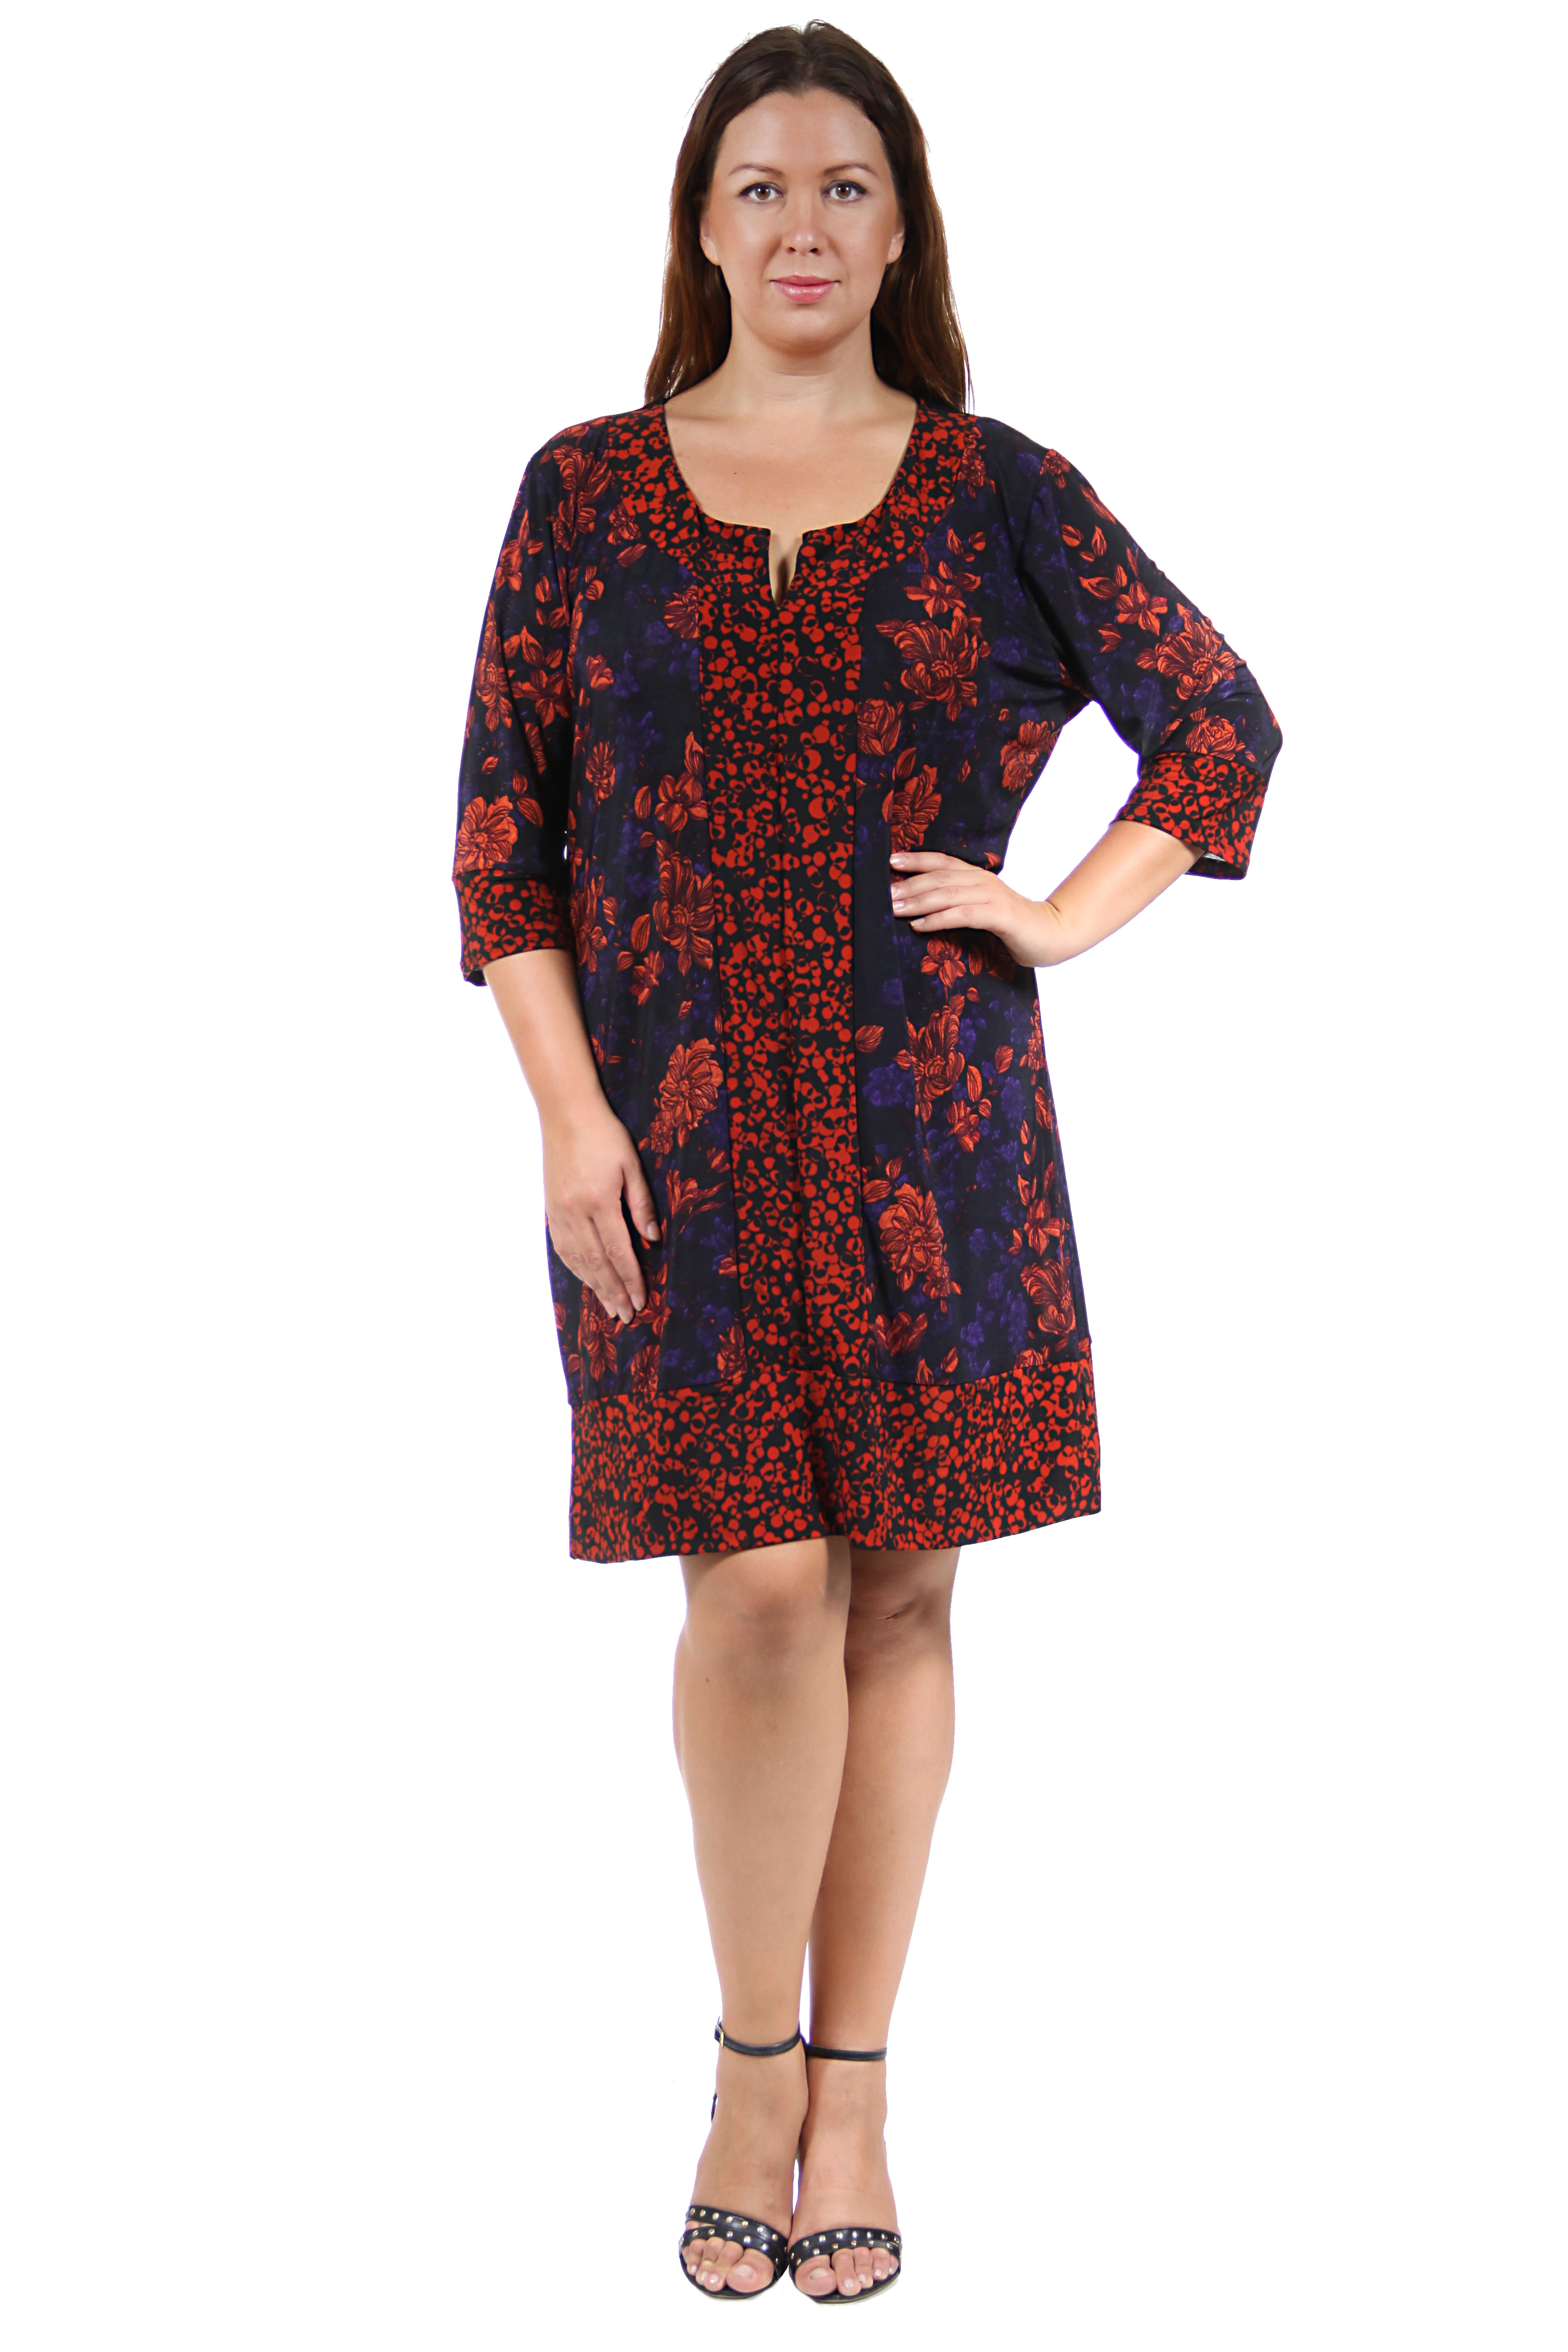 24/7 Comfort Apparel Women's Plus Size Fall Red Floral Polka-Dot Shift ...